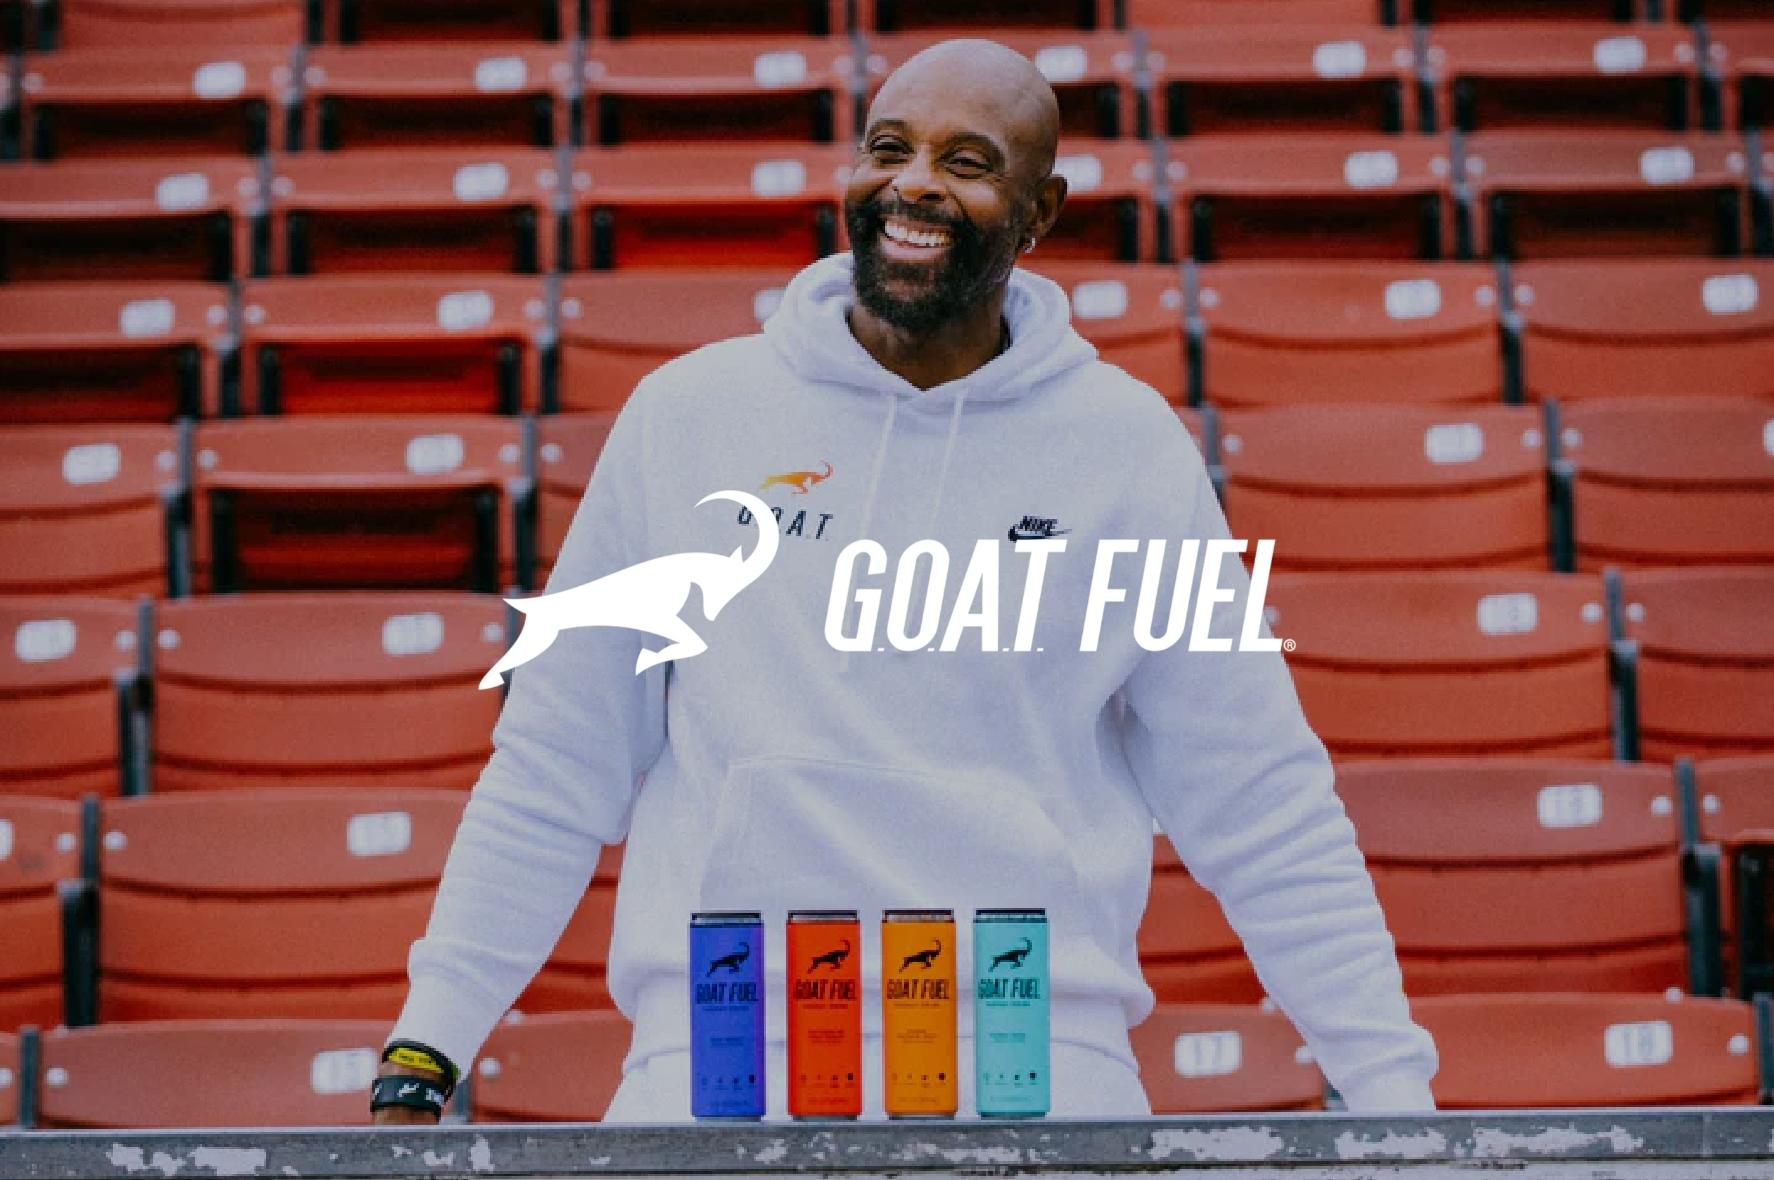 Lineout case study showing SEM, SMM, CRO, and analytics results for G.O.A.T. Fuel.